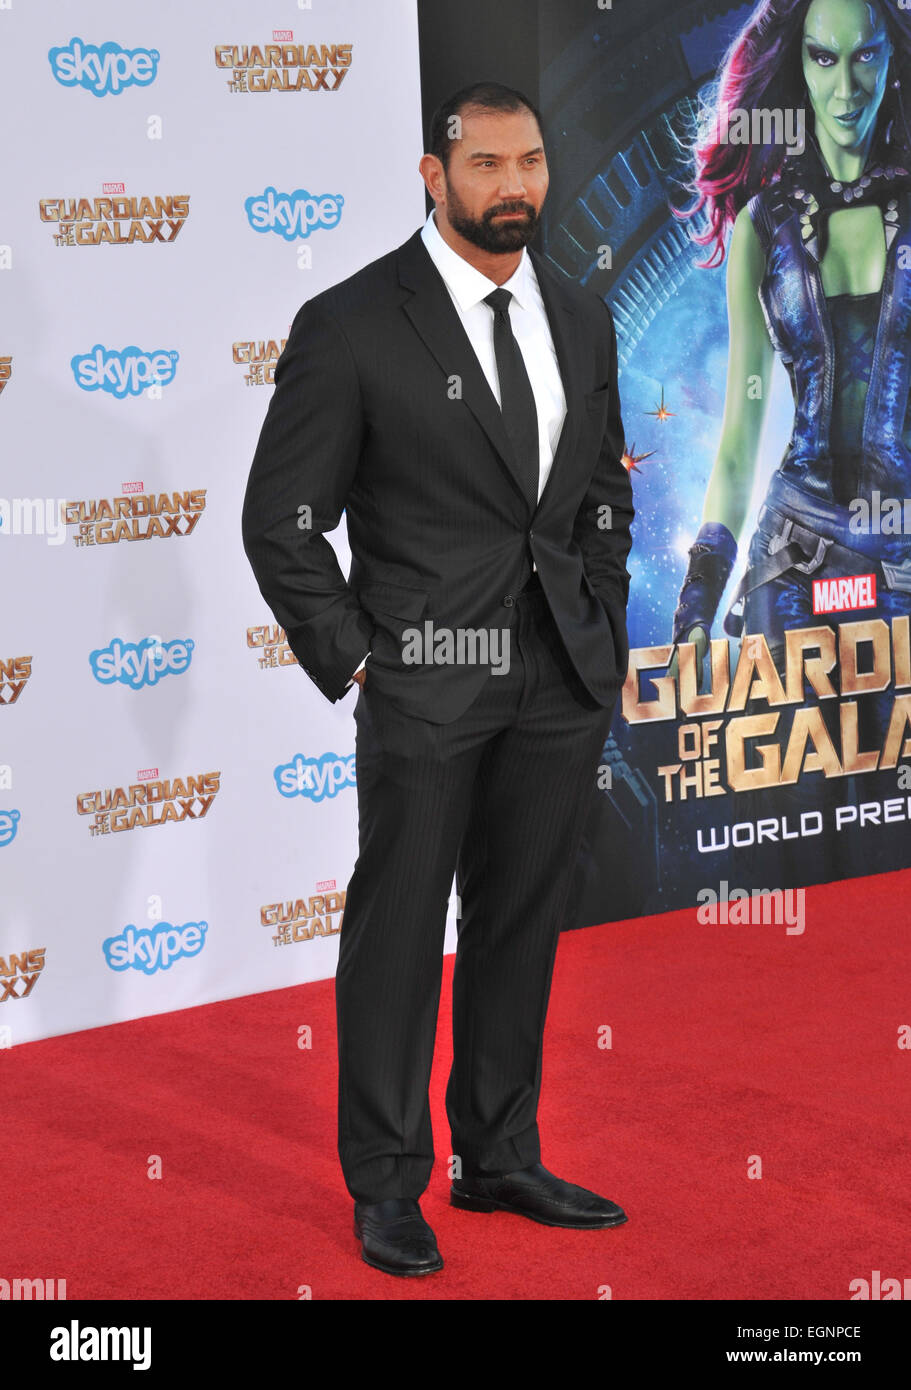 IRON HEAD FITz - Bautista at the Guardians of the Galaxy premiere in July  2014. Born David Michael Bautista Jr. January 18, 1969 (age 46)[1]  Washington, D.C., United States[2] Occupation Professional wrestler